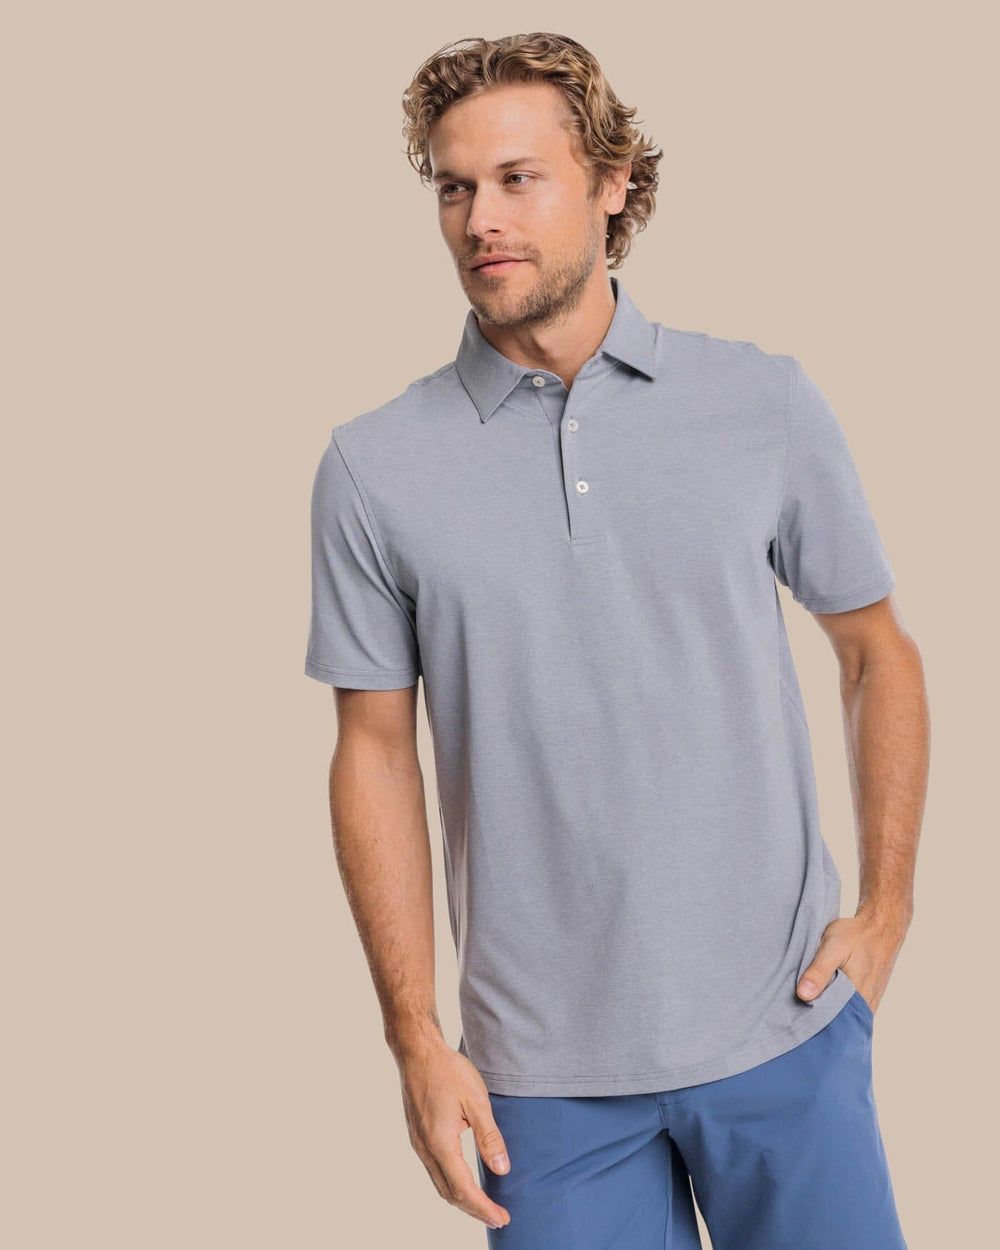 The front view of the brrr°®-eeze Heather Performance Polo Shirt by Southern Tide - Heather Steel Grey